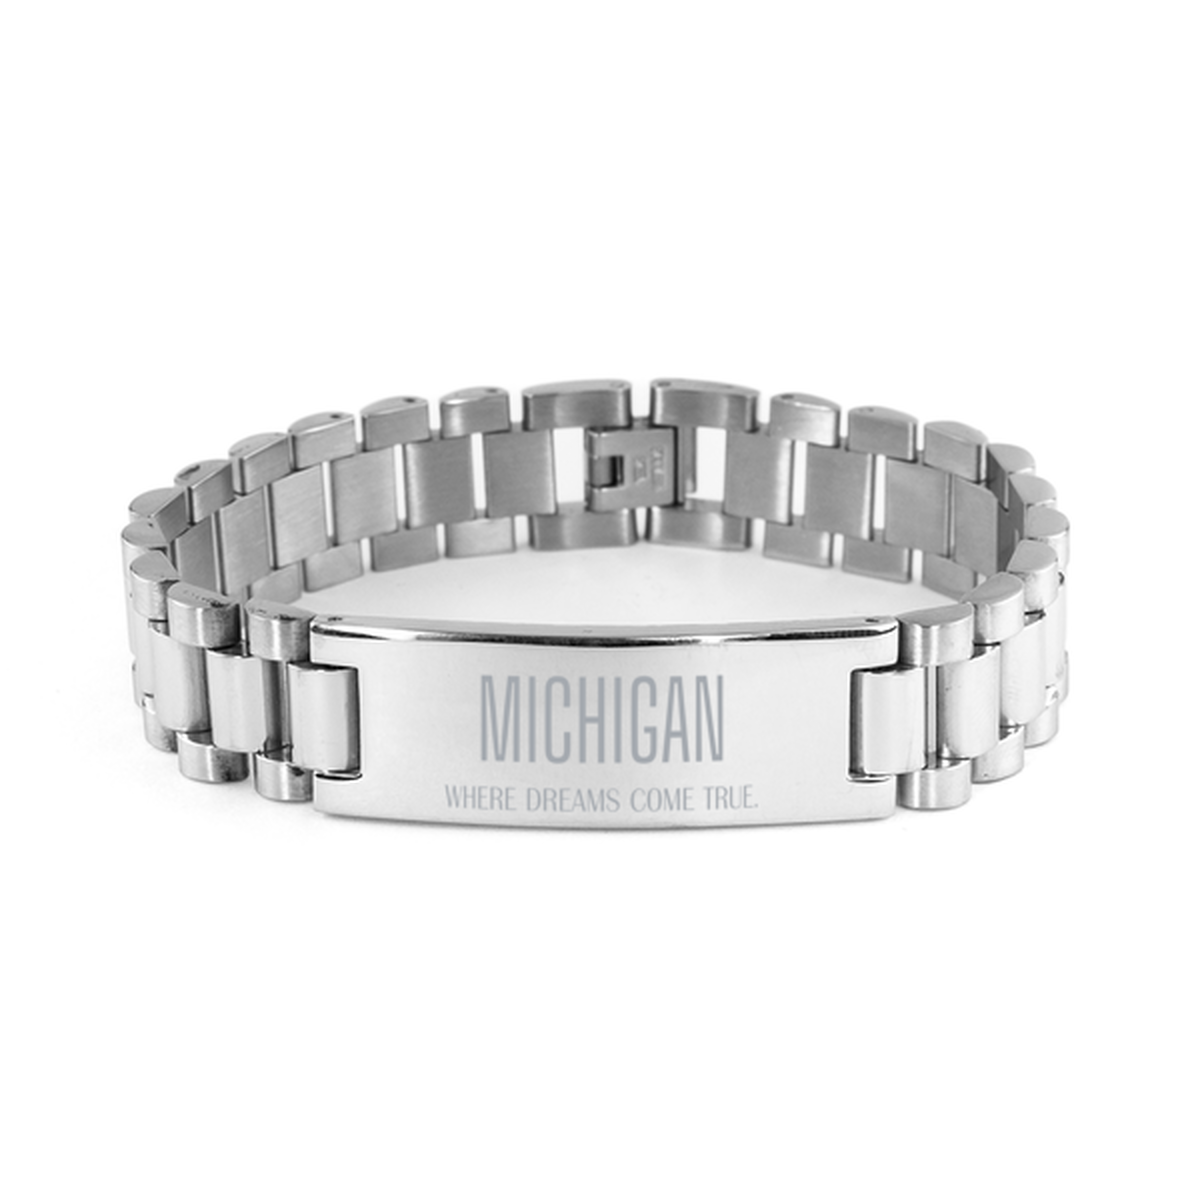 Love Michigan State Ladder Stainless Steel Bracelet, Michigan Where dreams come true, Birthday Inspirational Gifts For Michigan Men, Women, Friends